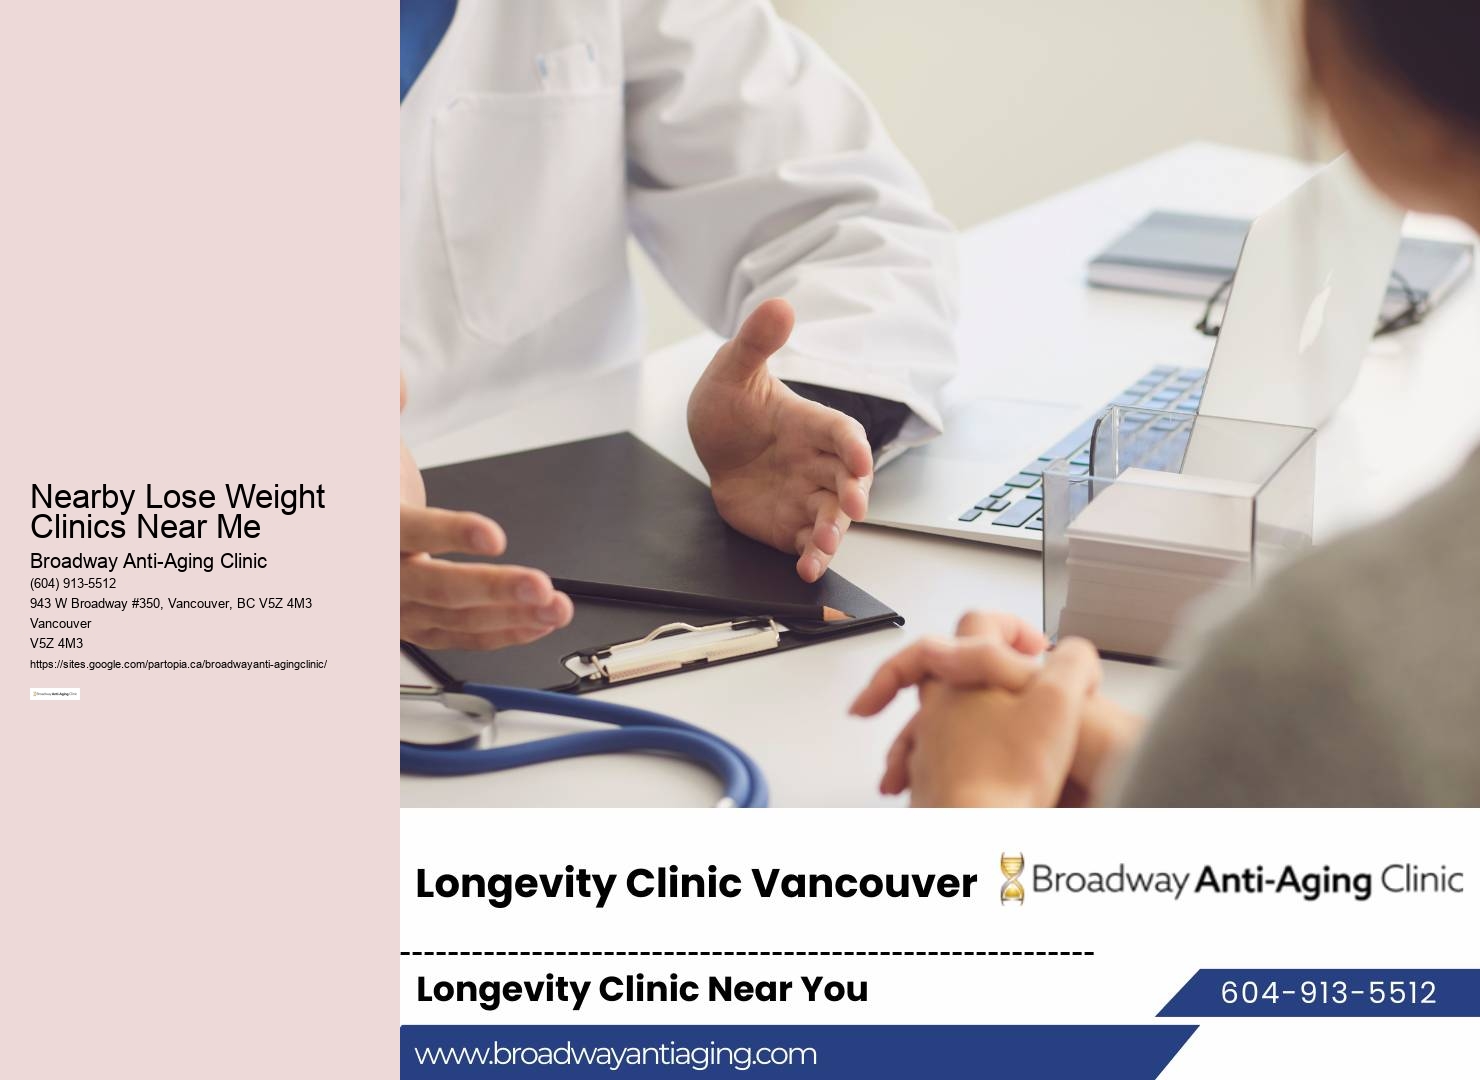 Premier Weight Loss Clinic Vancouver BC